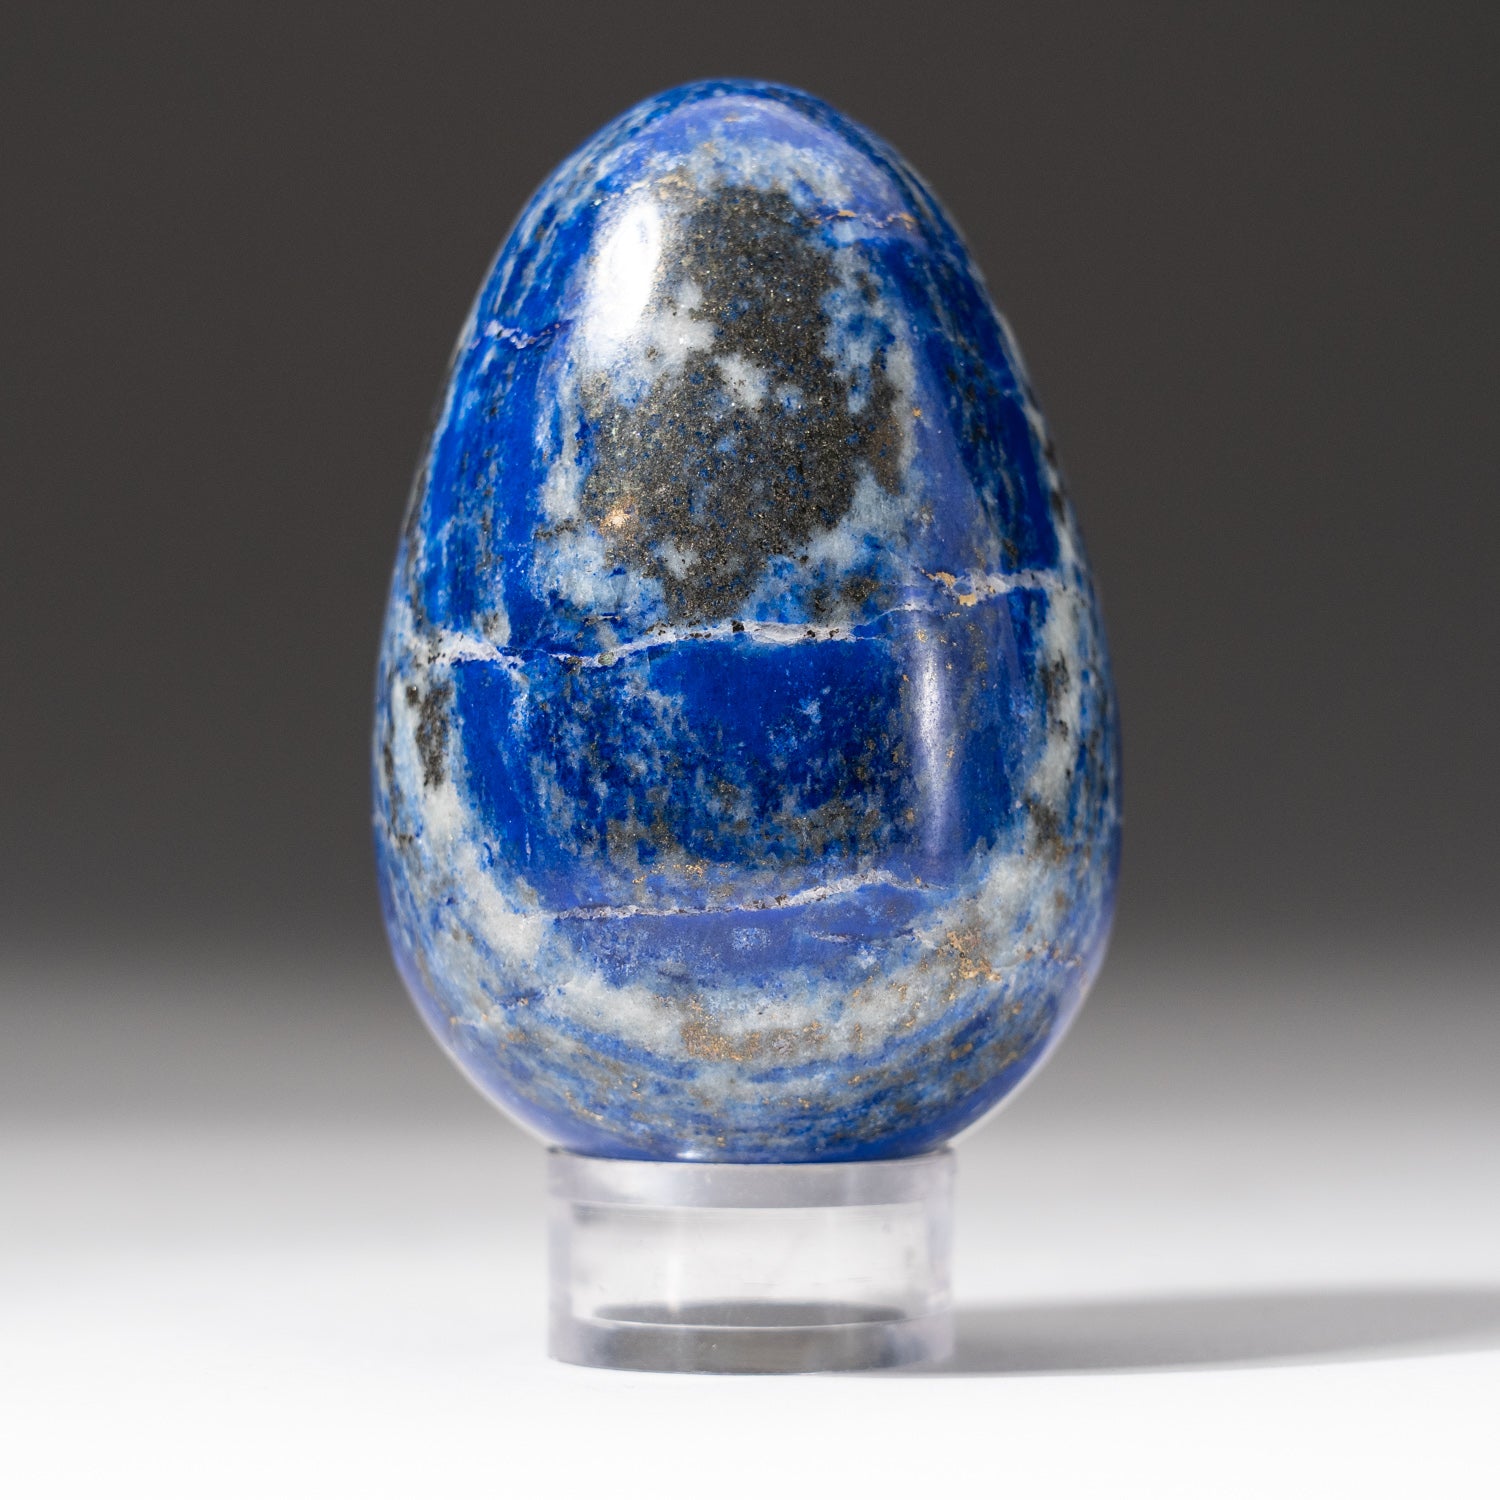 Polished Lapis Lazuli Egg from Afghanistan (235.4 grams)